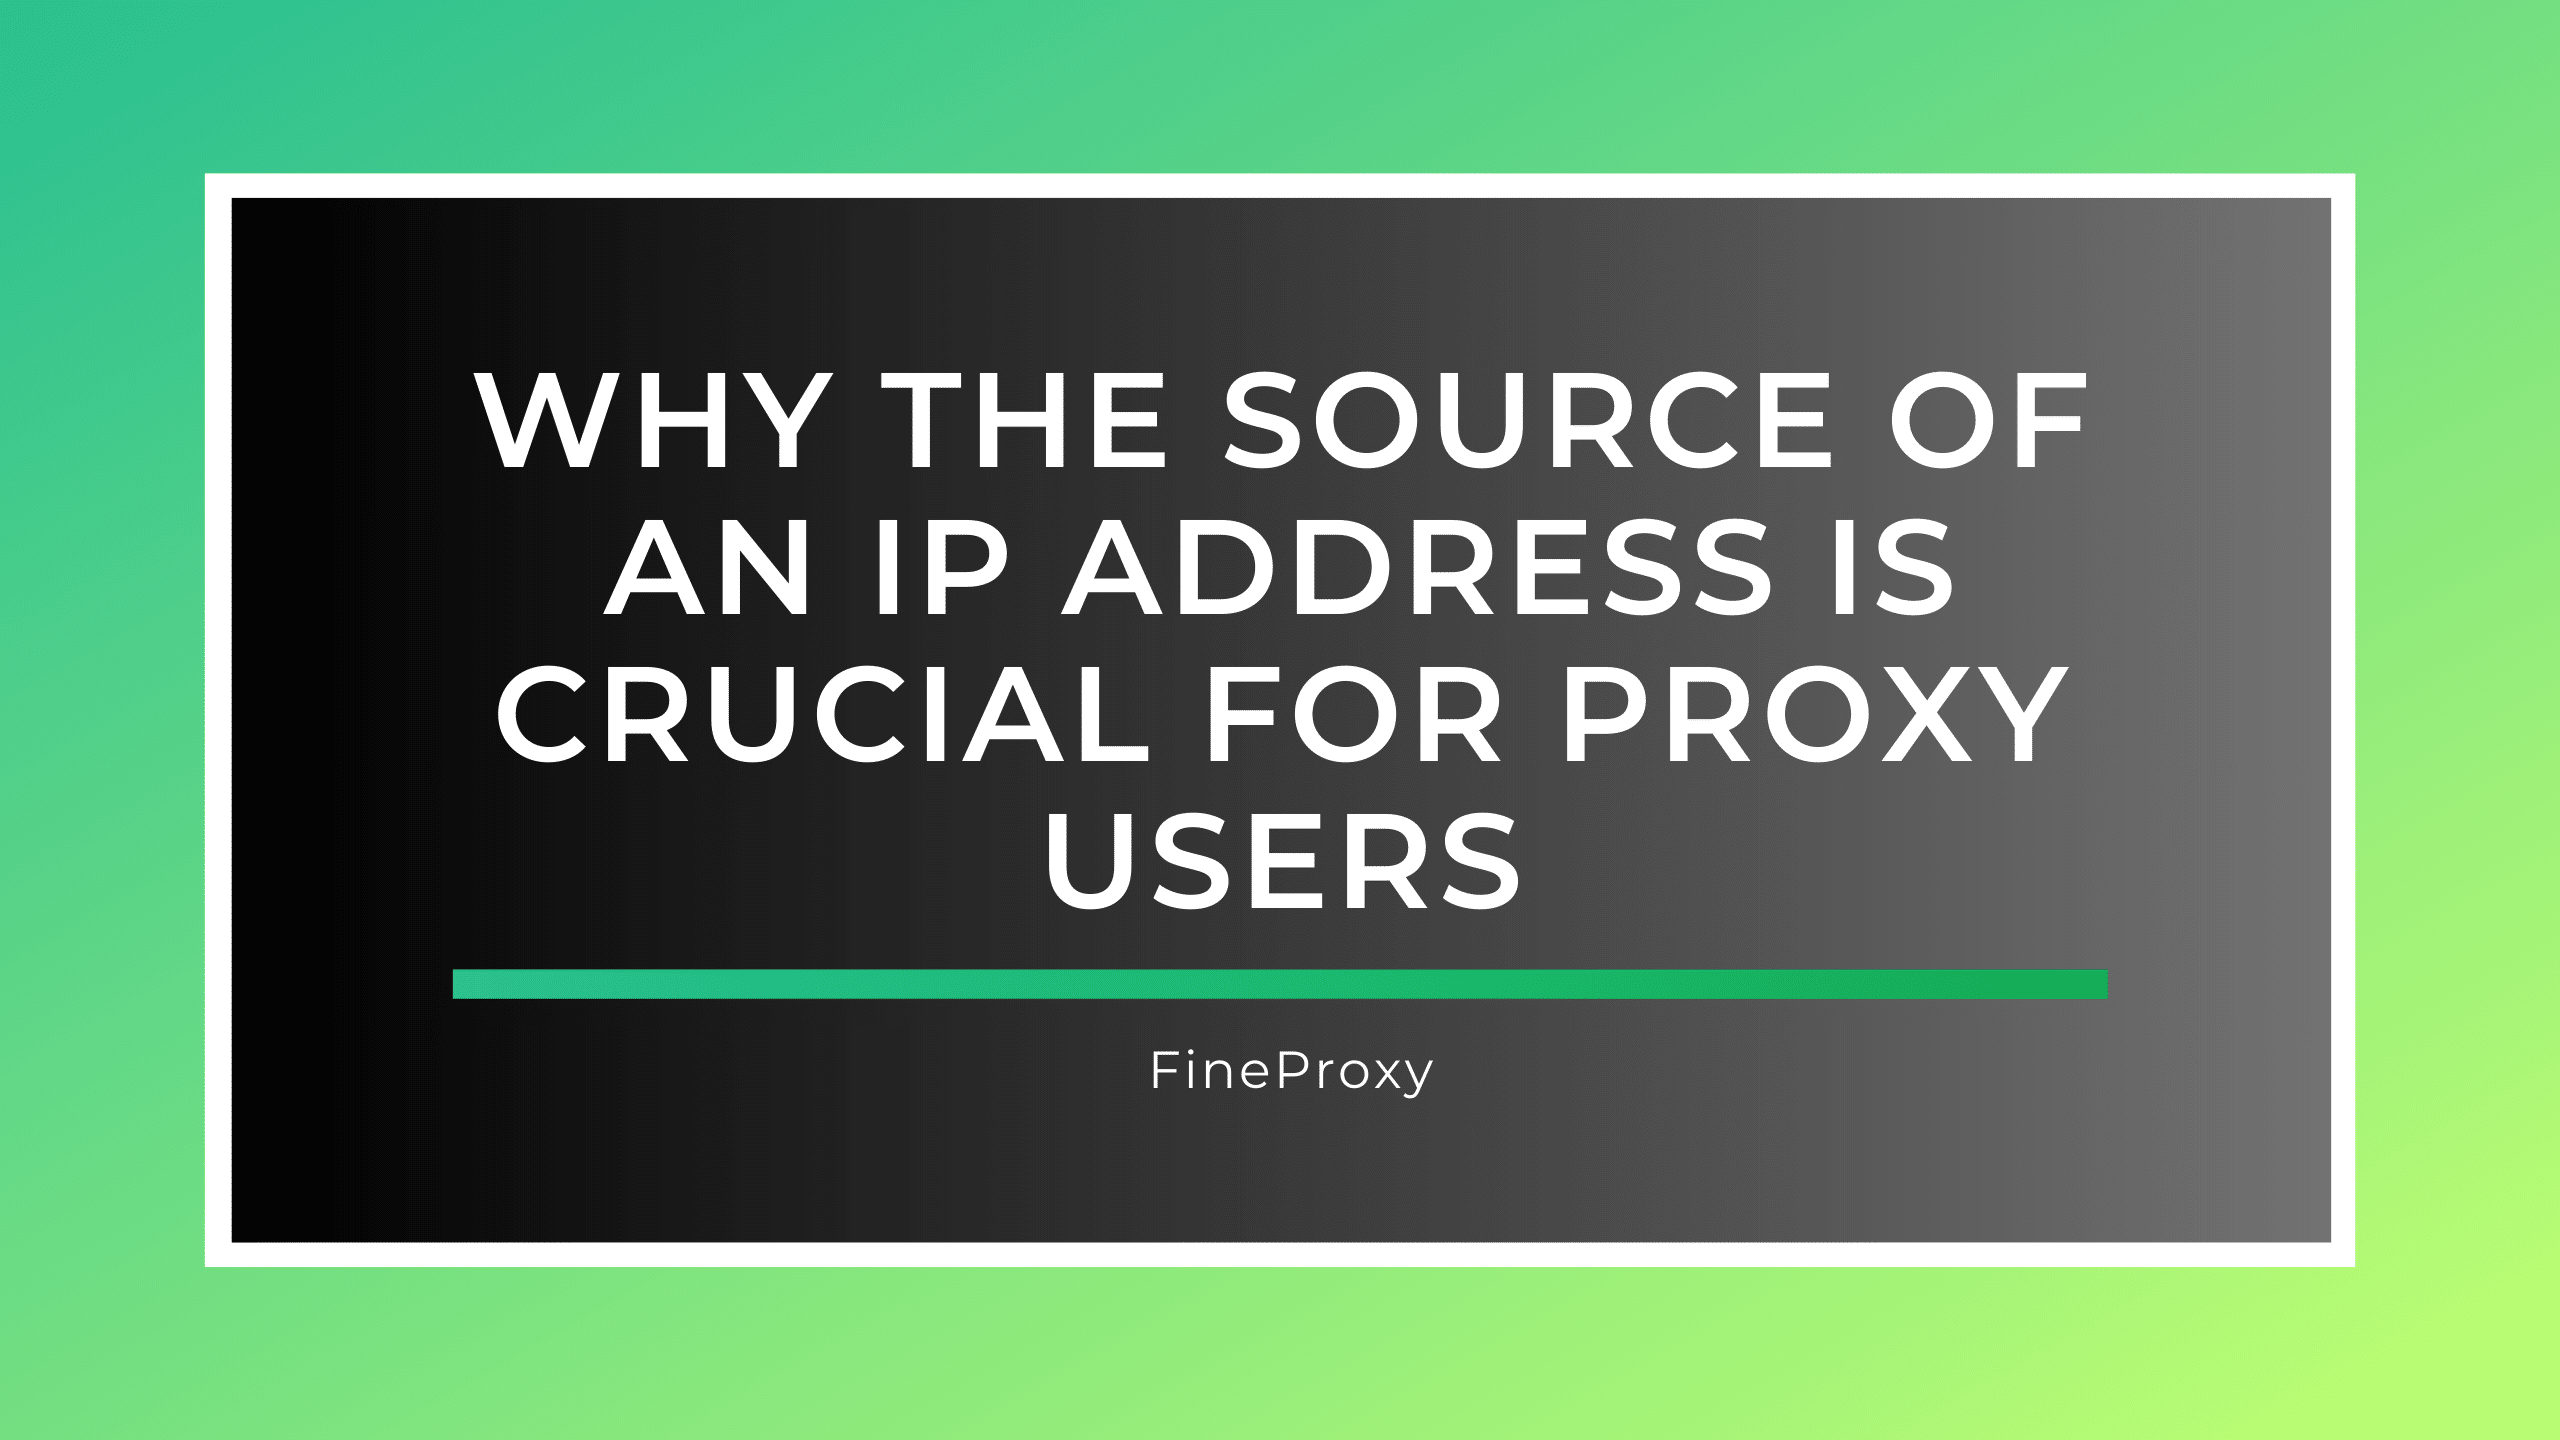 Why the Source of an IP Address is Crucial for Proxy Users